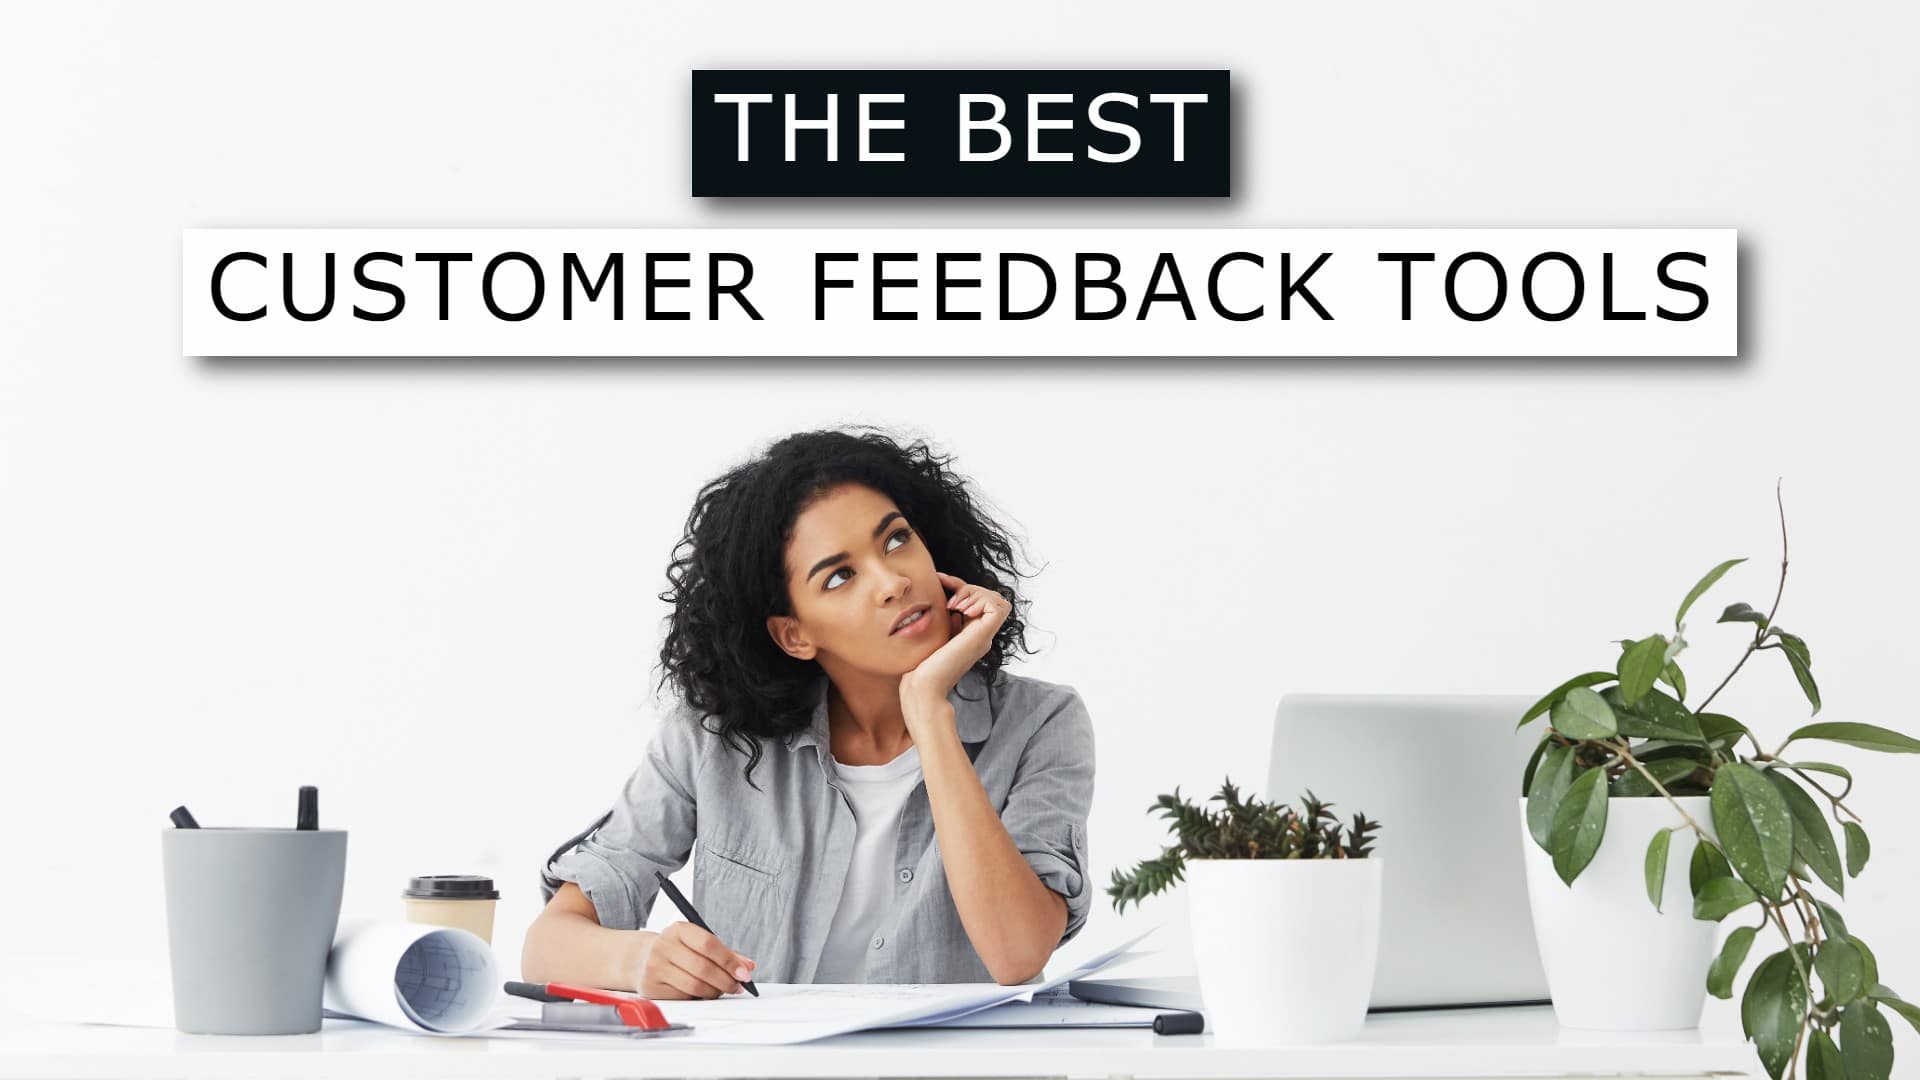 The 28 Best Customer Feedback Tools You’ll Want to Try | 2022 Updated List